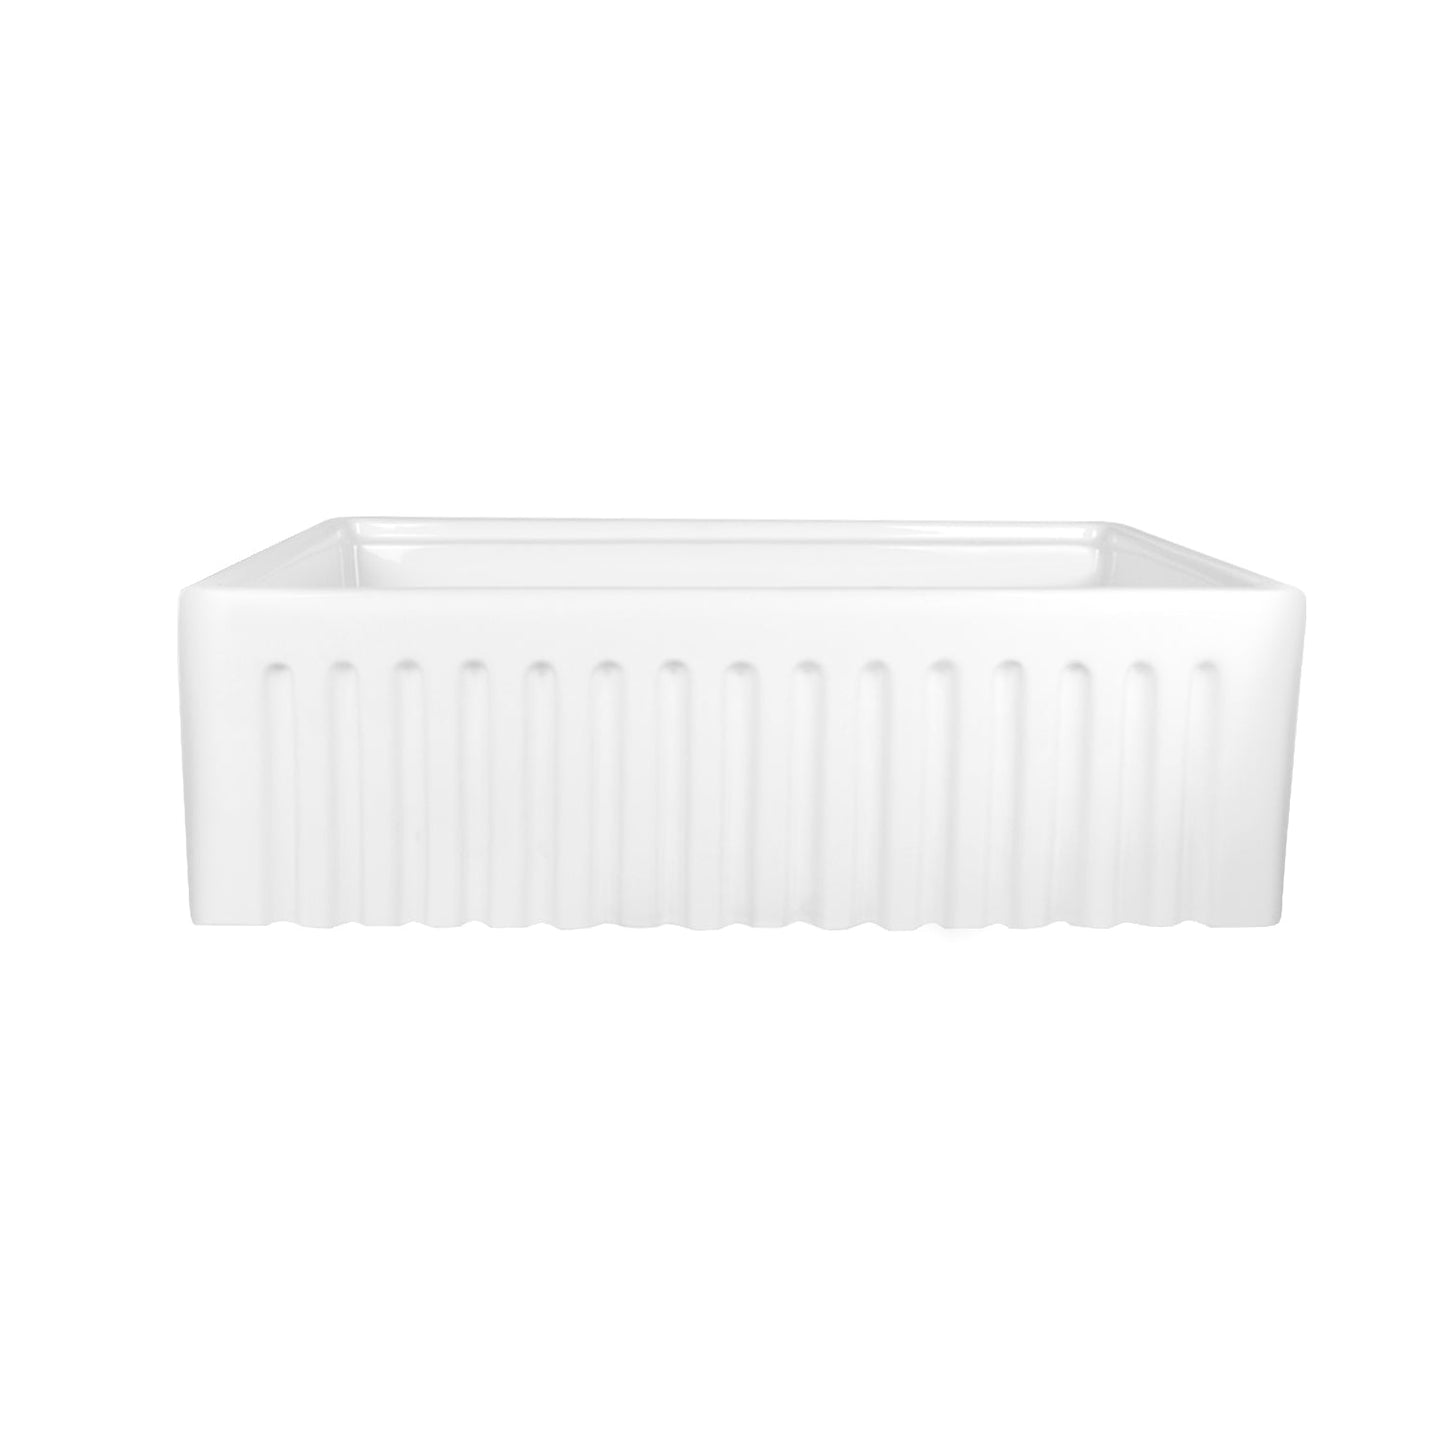 DeerValley 33" L x 20" W DV-1K0065 Rectangular White Easy-Cleaning Farmhouse Kitchen Sink With Basket Strainer, Basin Rack/Bottom Grid, Cutting Board and Colander